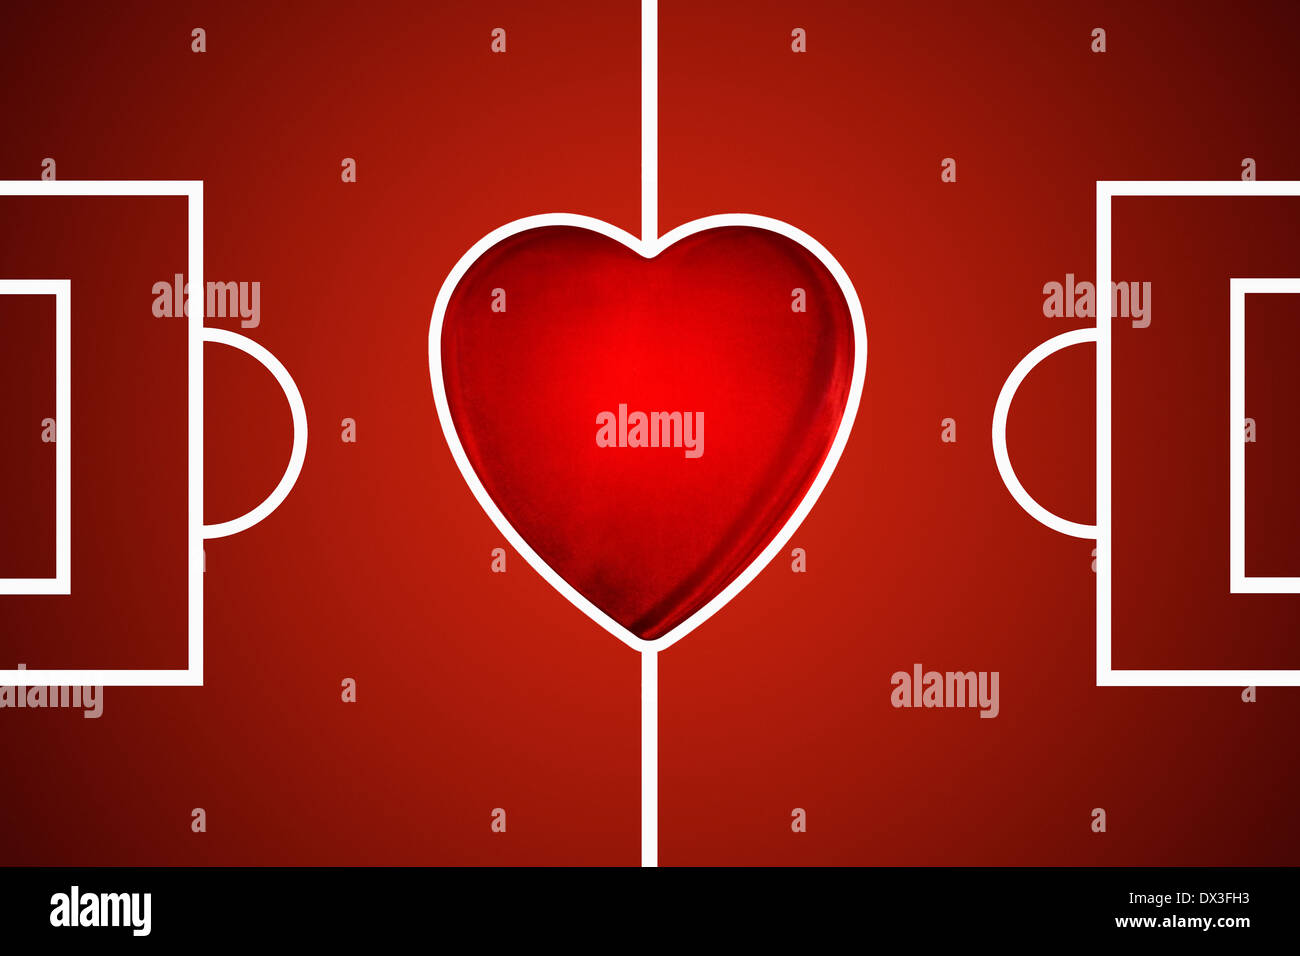 digitally illustrated red football pitch with a love heart as the centre circle Stock Photo